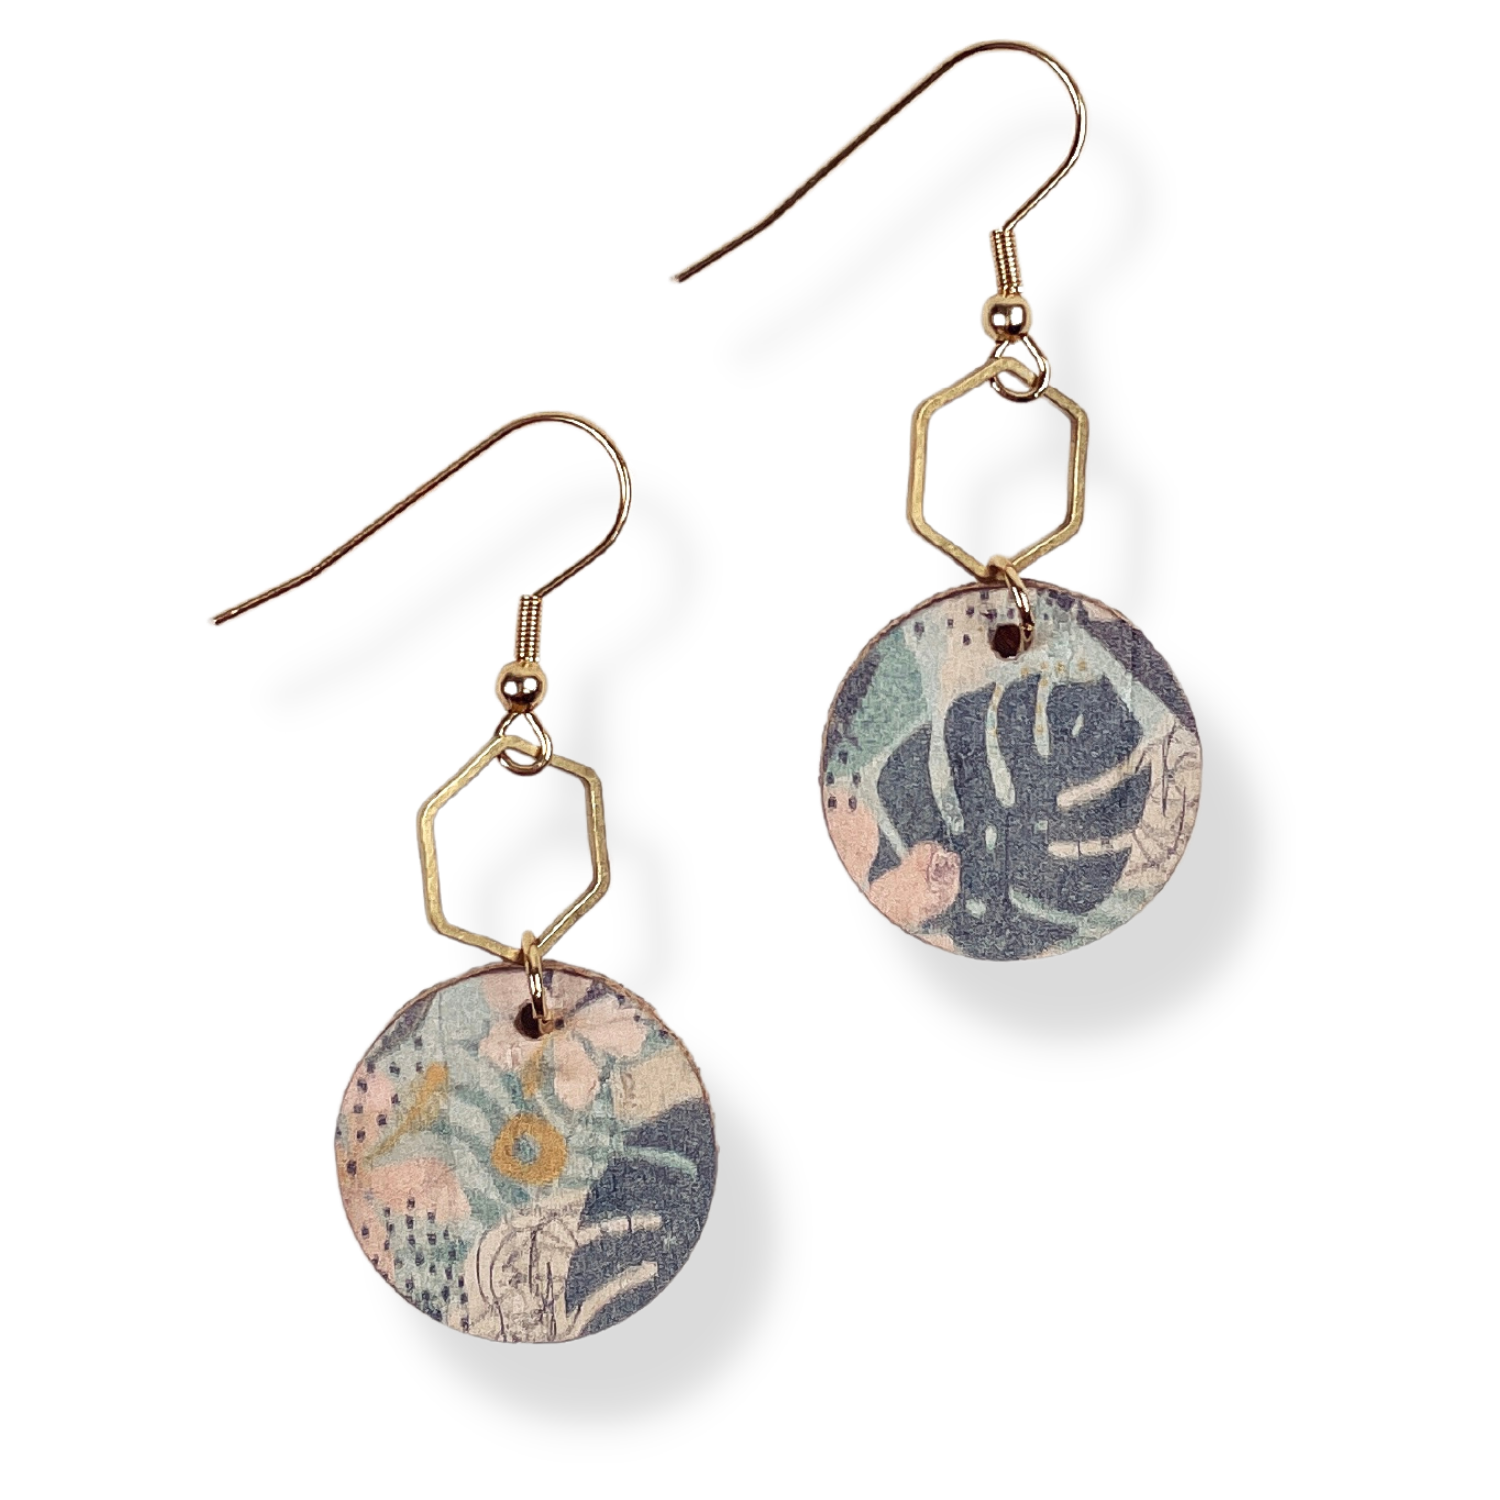 Elizabeth Gold or Silver Hexagon and Cork Earrings- Monstera Leaves